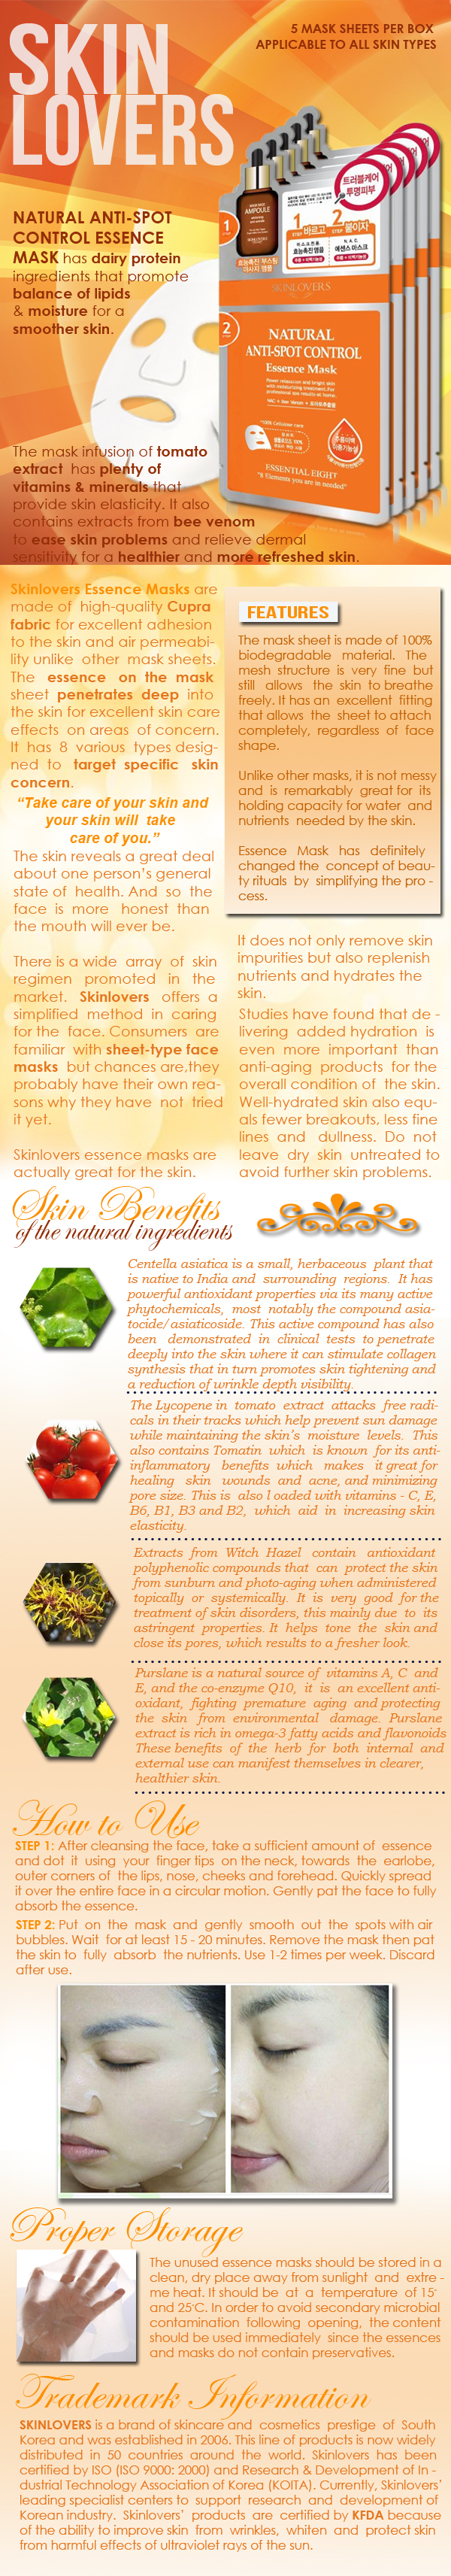 Skinlovers Natural Anti-Spot Control Essence Mask Product Information